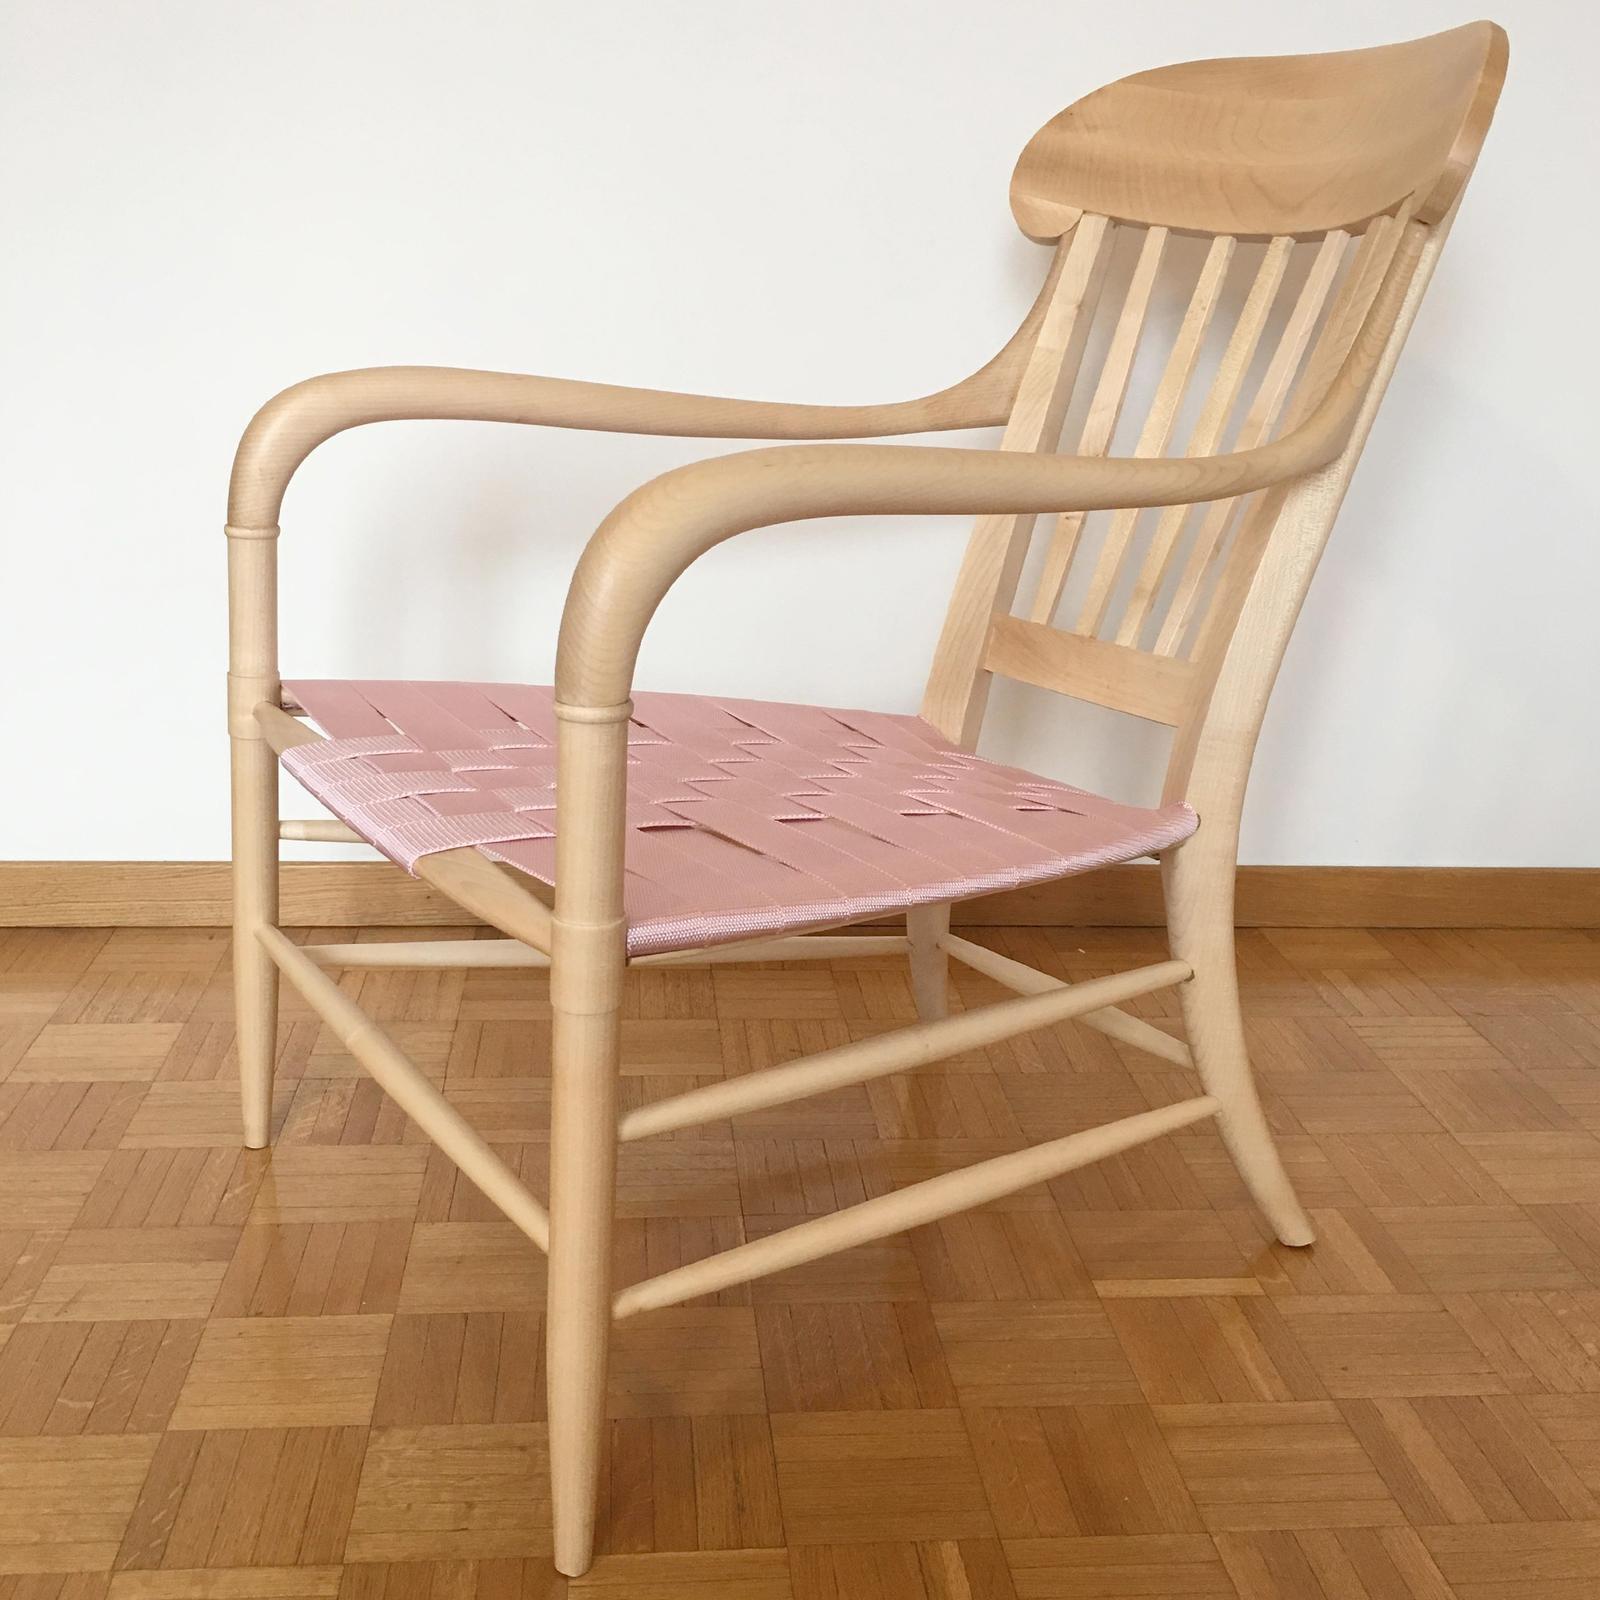 Designed by Federico Carandini, 2014, this exclusive chair revisits the silhouette of the Chiavari dormeuse from the 19th century in a contemporary style. Handcrafted of solid maple wood with a natural finish, this piece boasts graceful and flowing